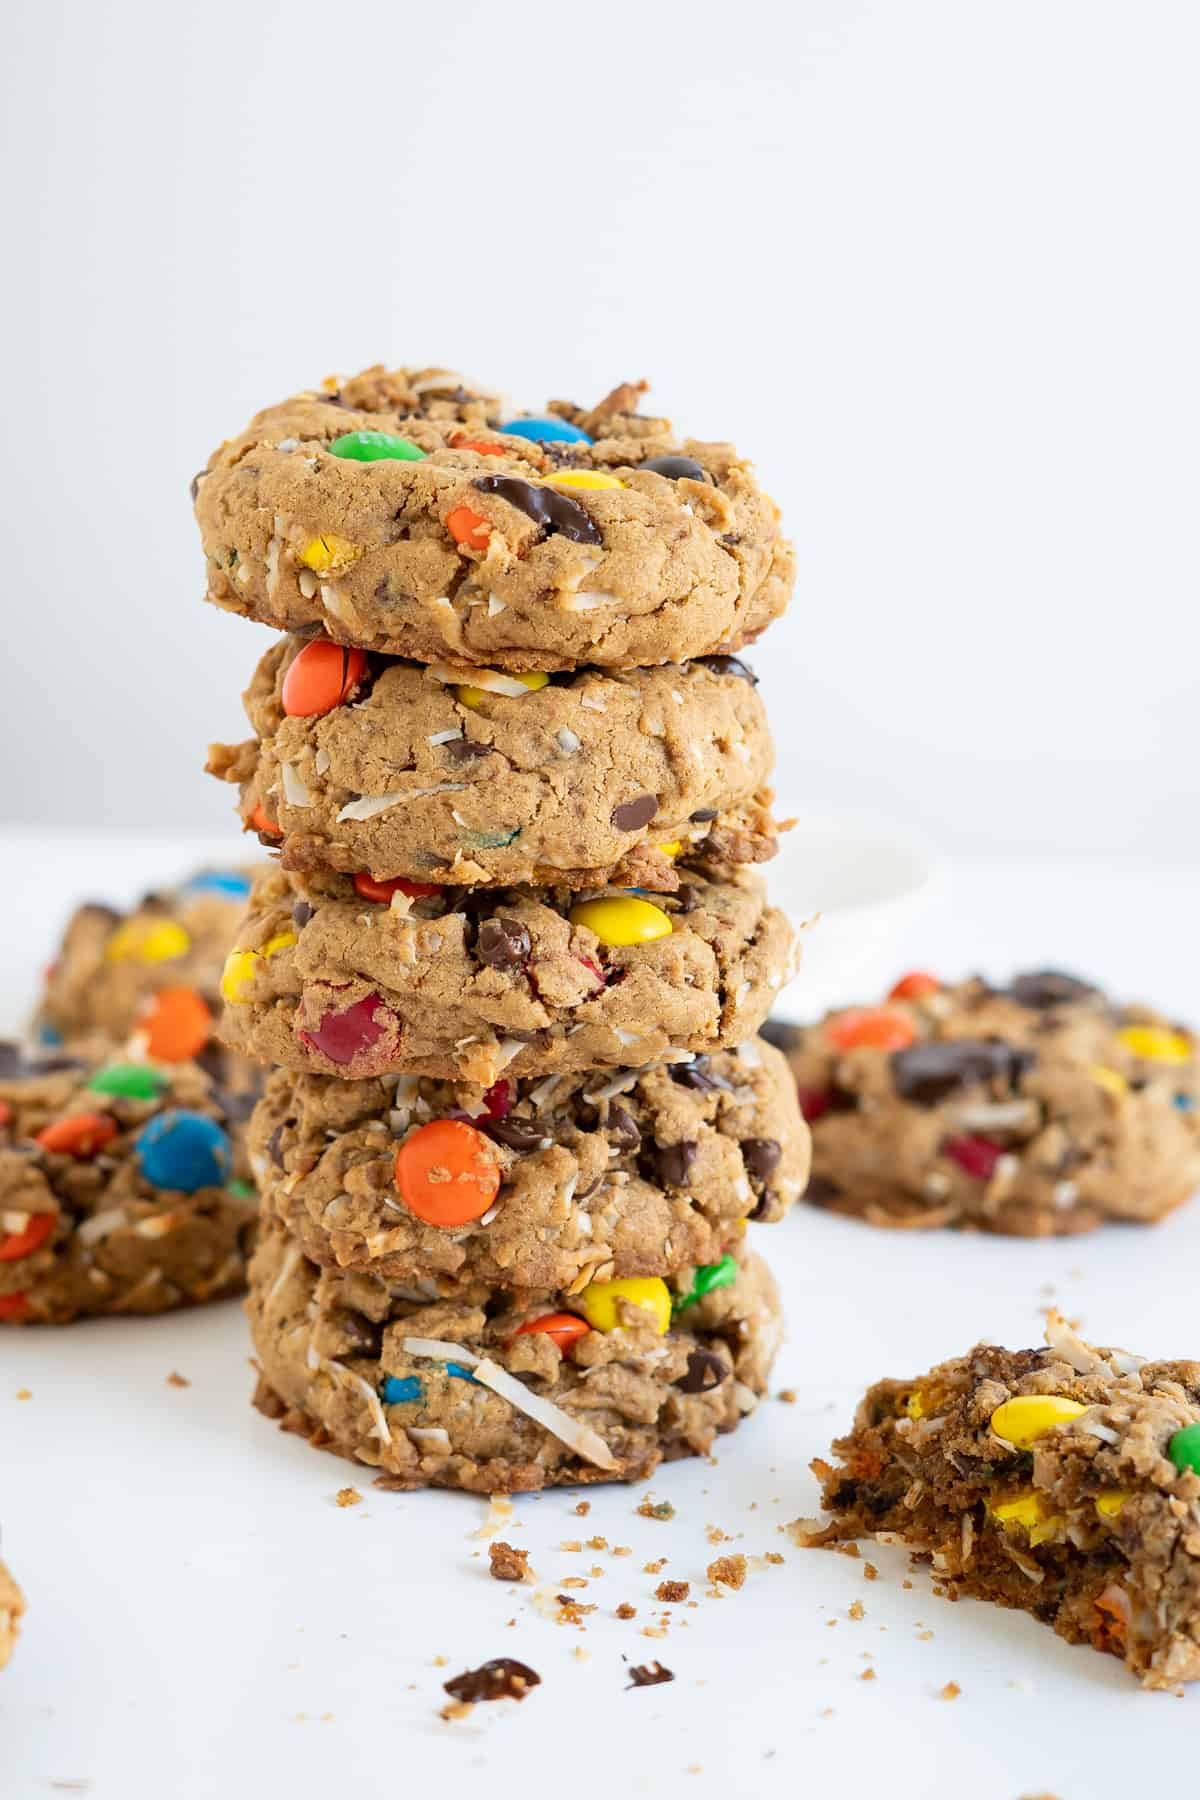 A stack of five gluten-free monster cookies.